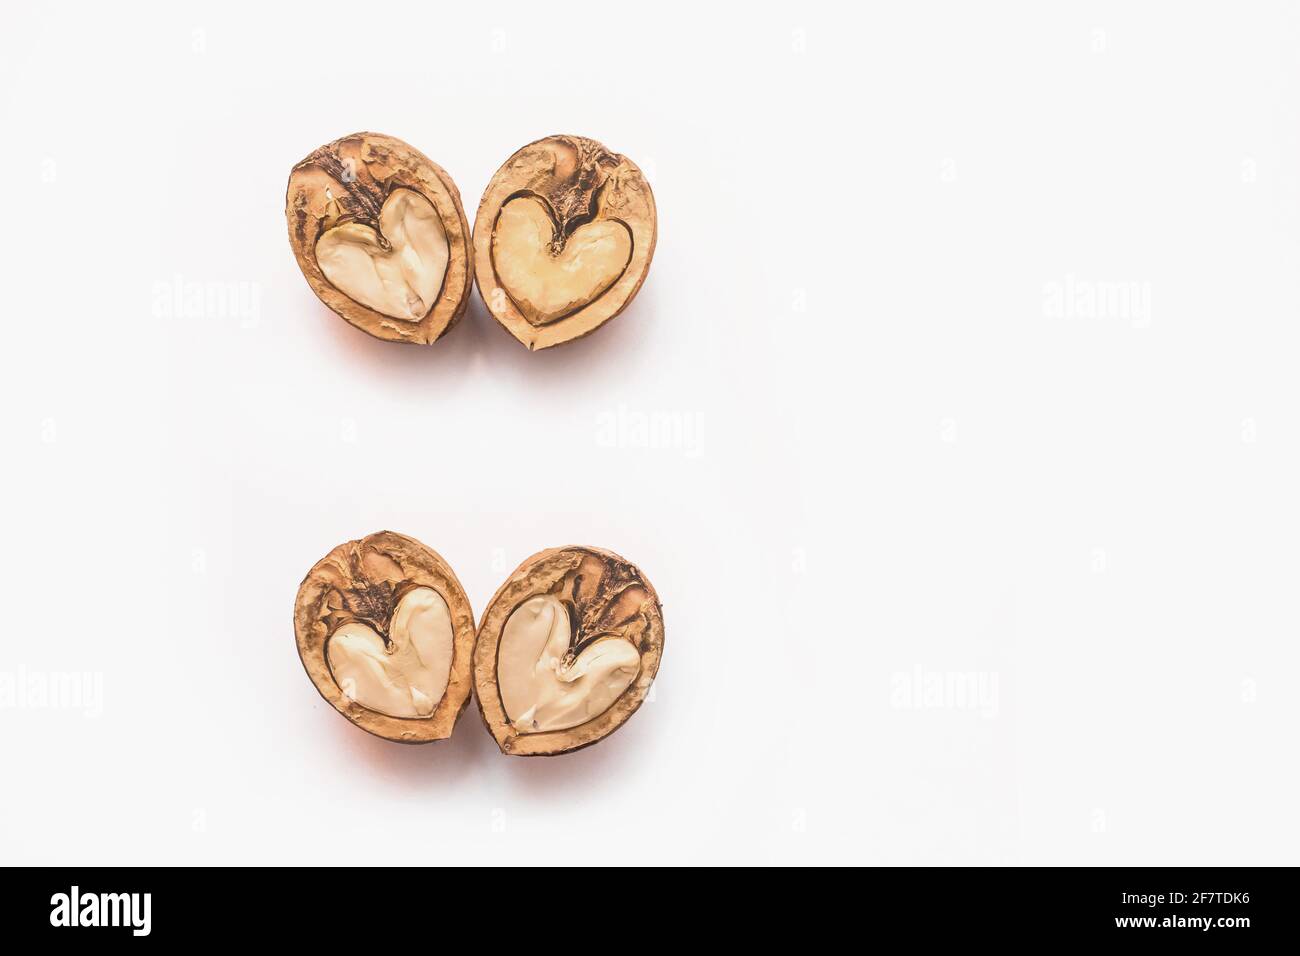 Halves of a walnut in the shape of a heart isolated on a white background. Stock Photo